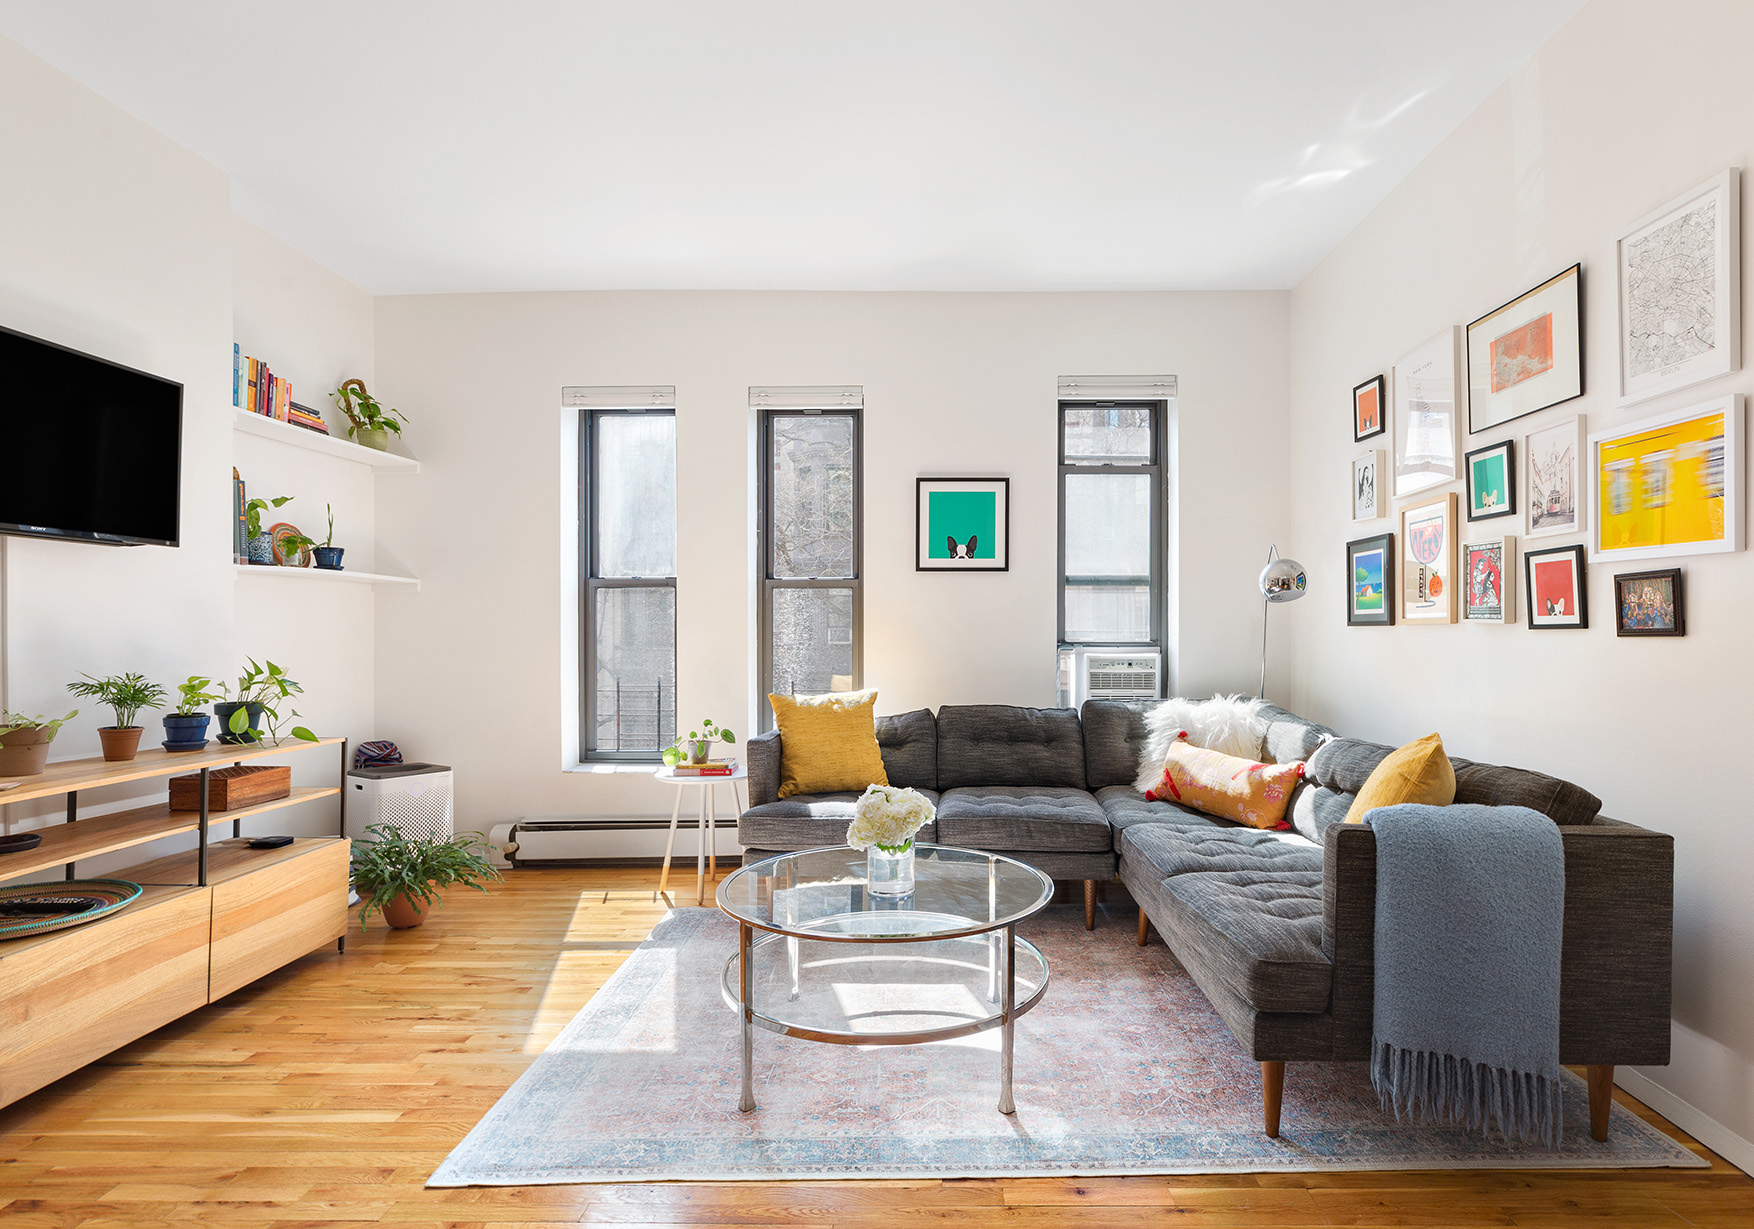 195 Garfield Place, Unit 2S, Brooklyn, NY 11215 | Compass